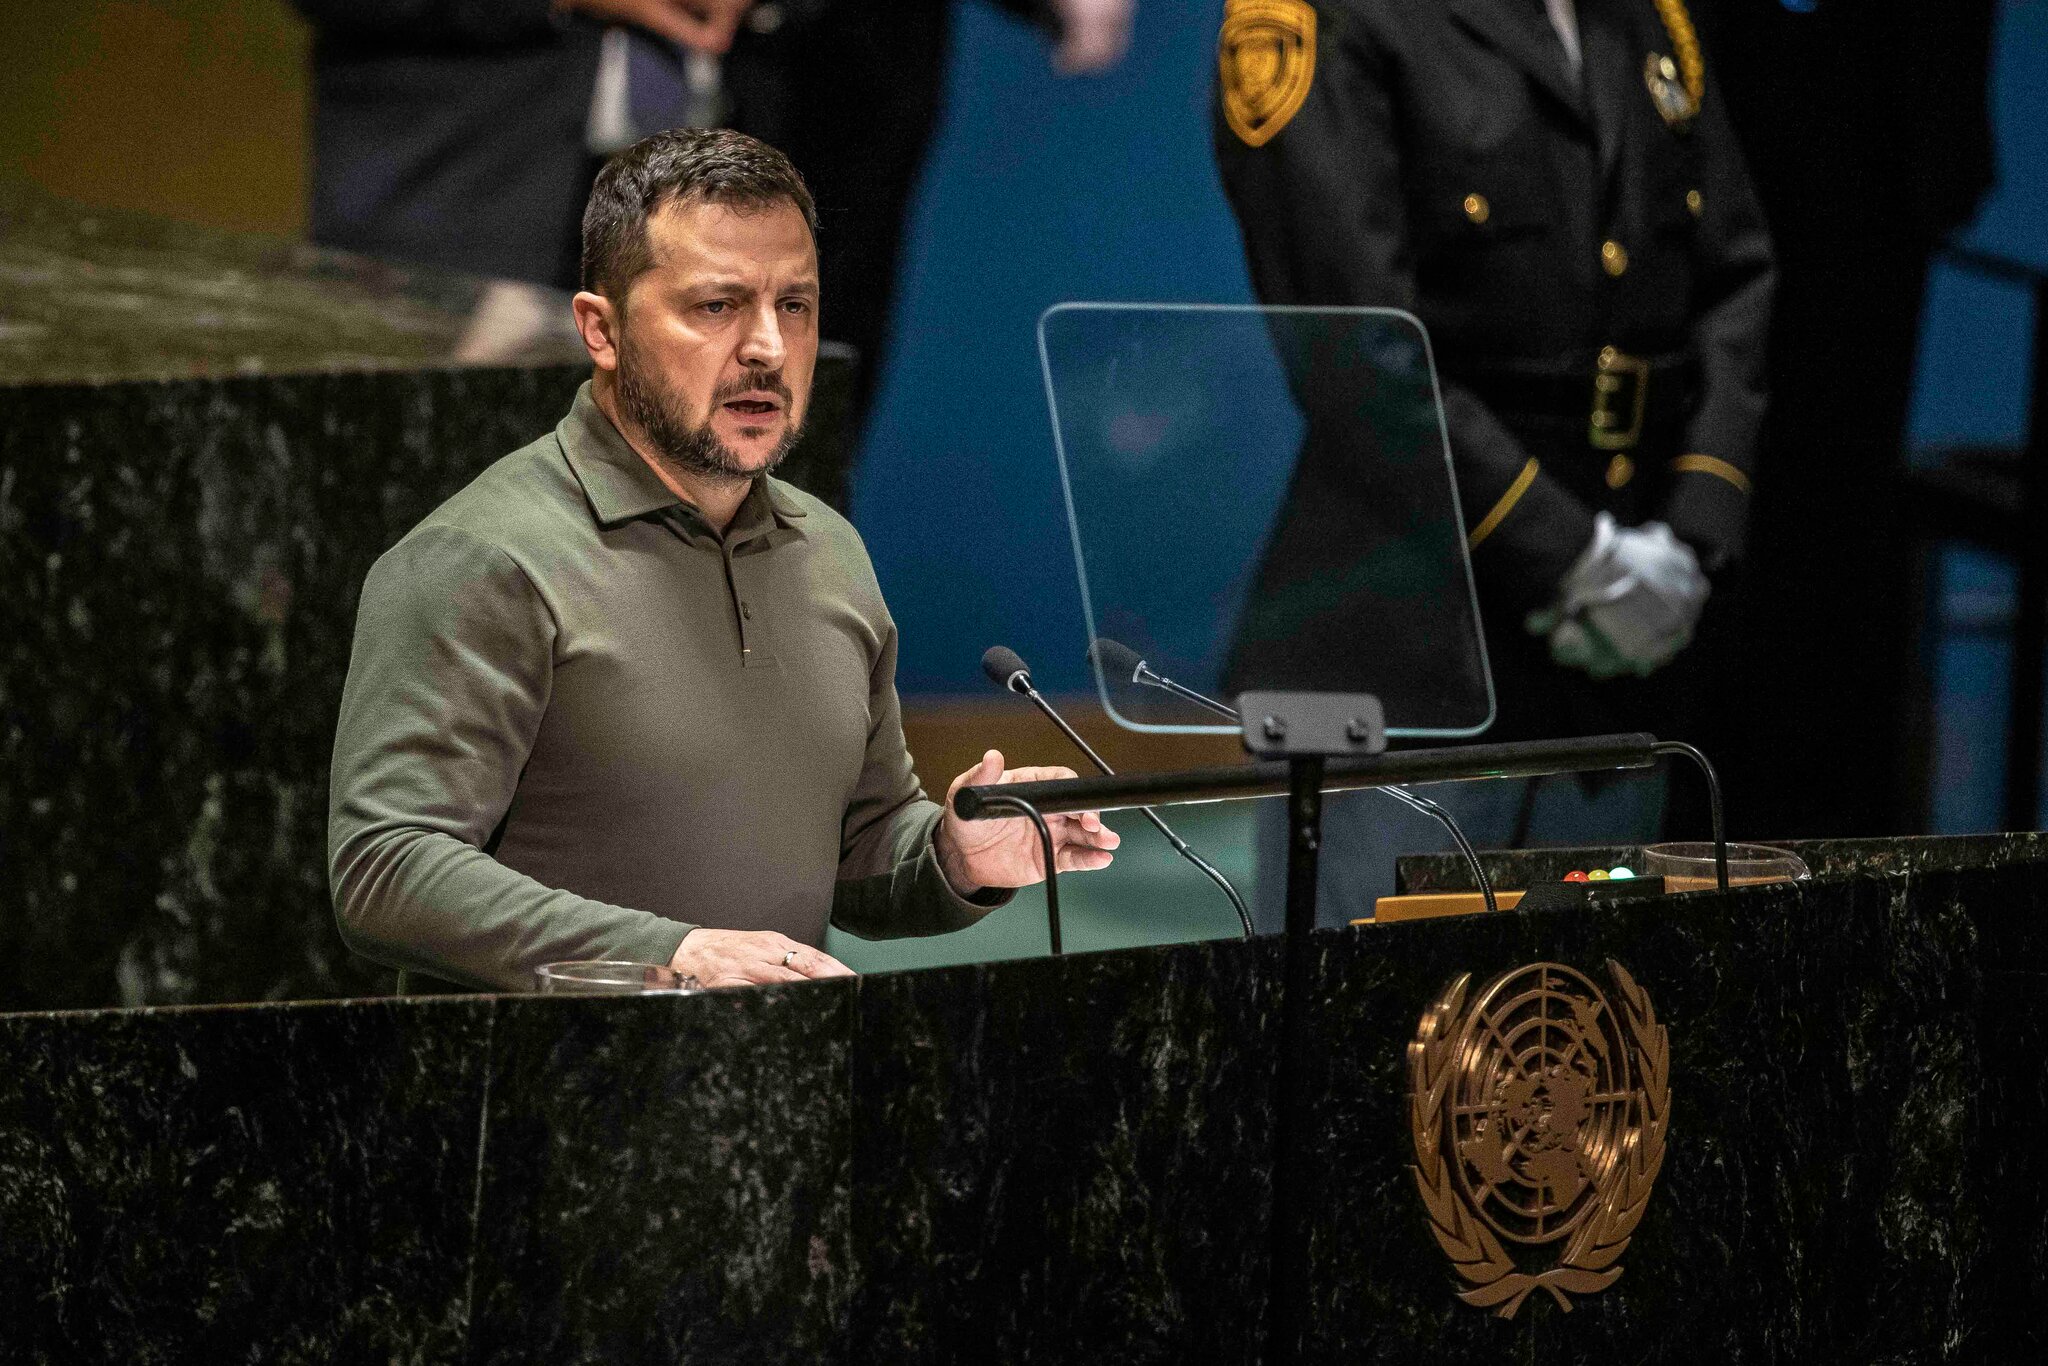 President Zelenskiy warns of potential large-scale Russian offensive (Credits: The NY Times)